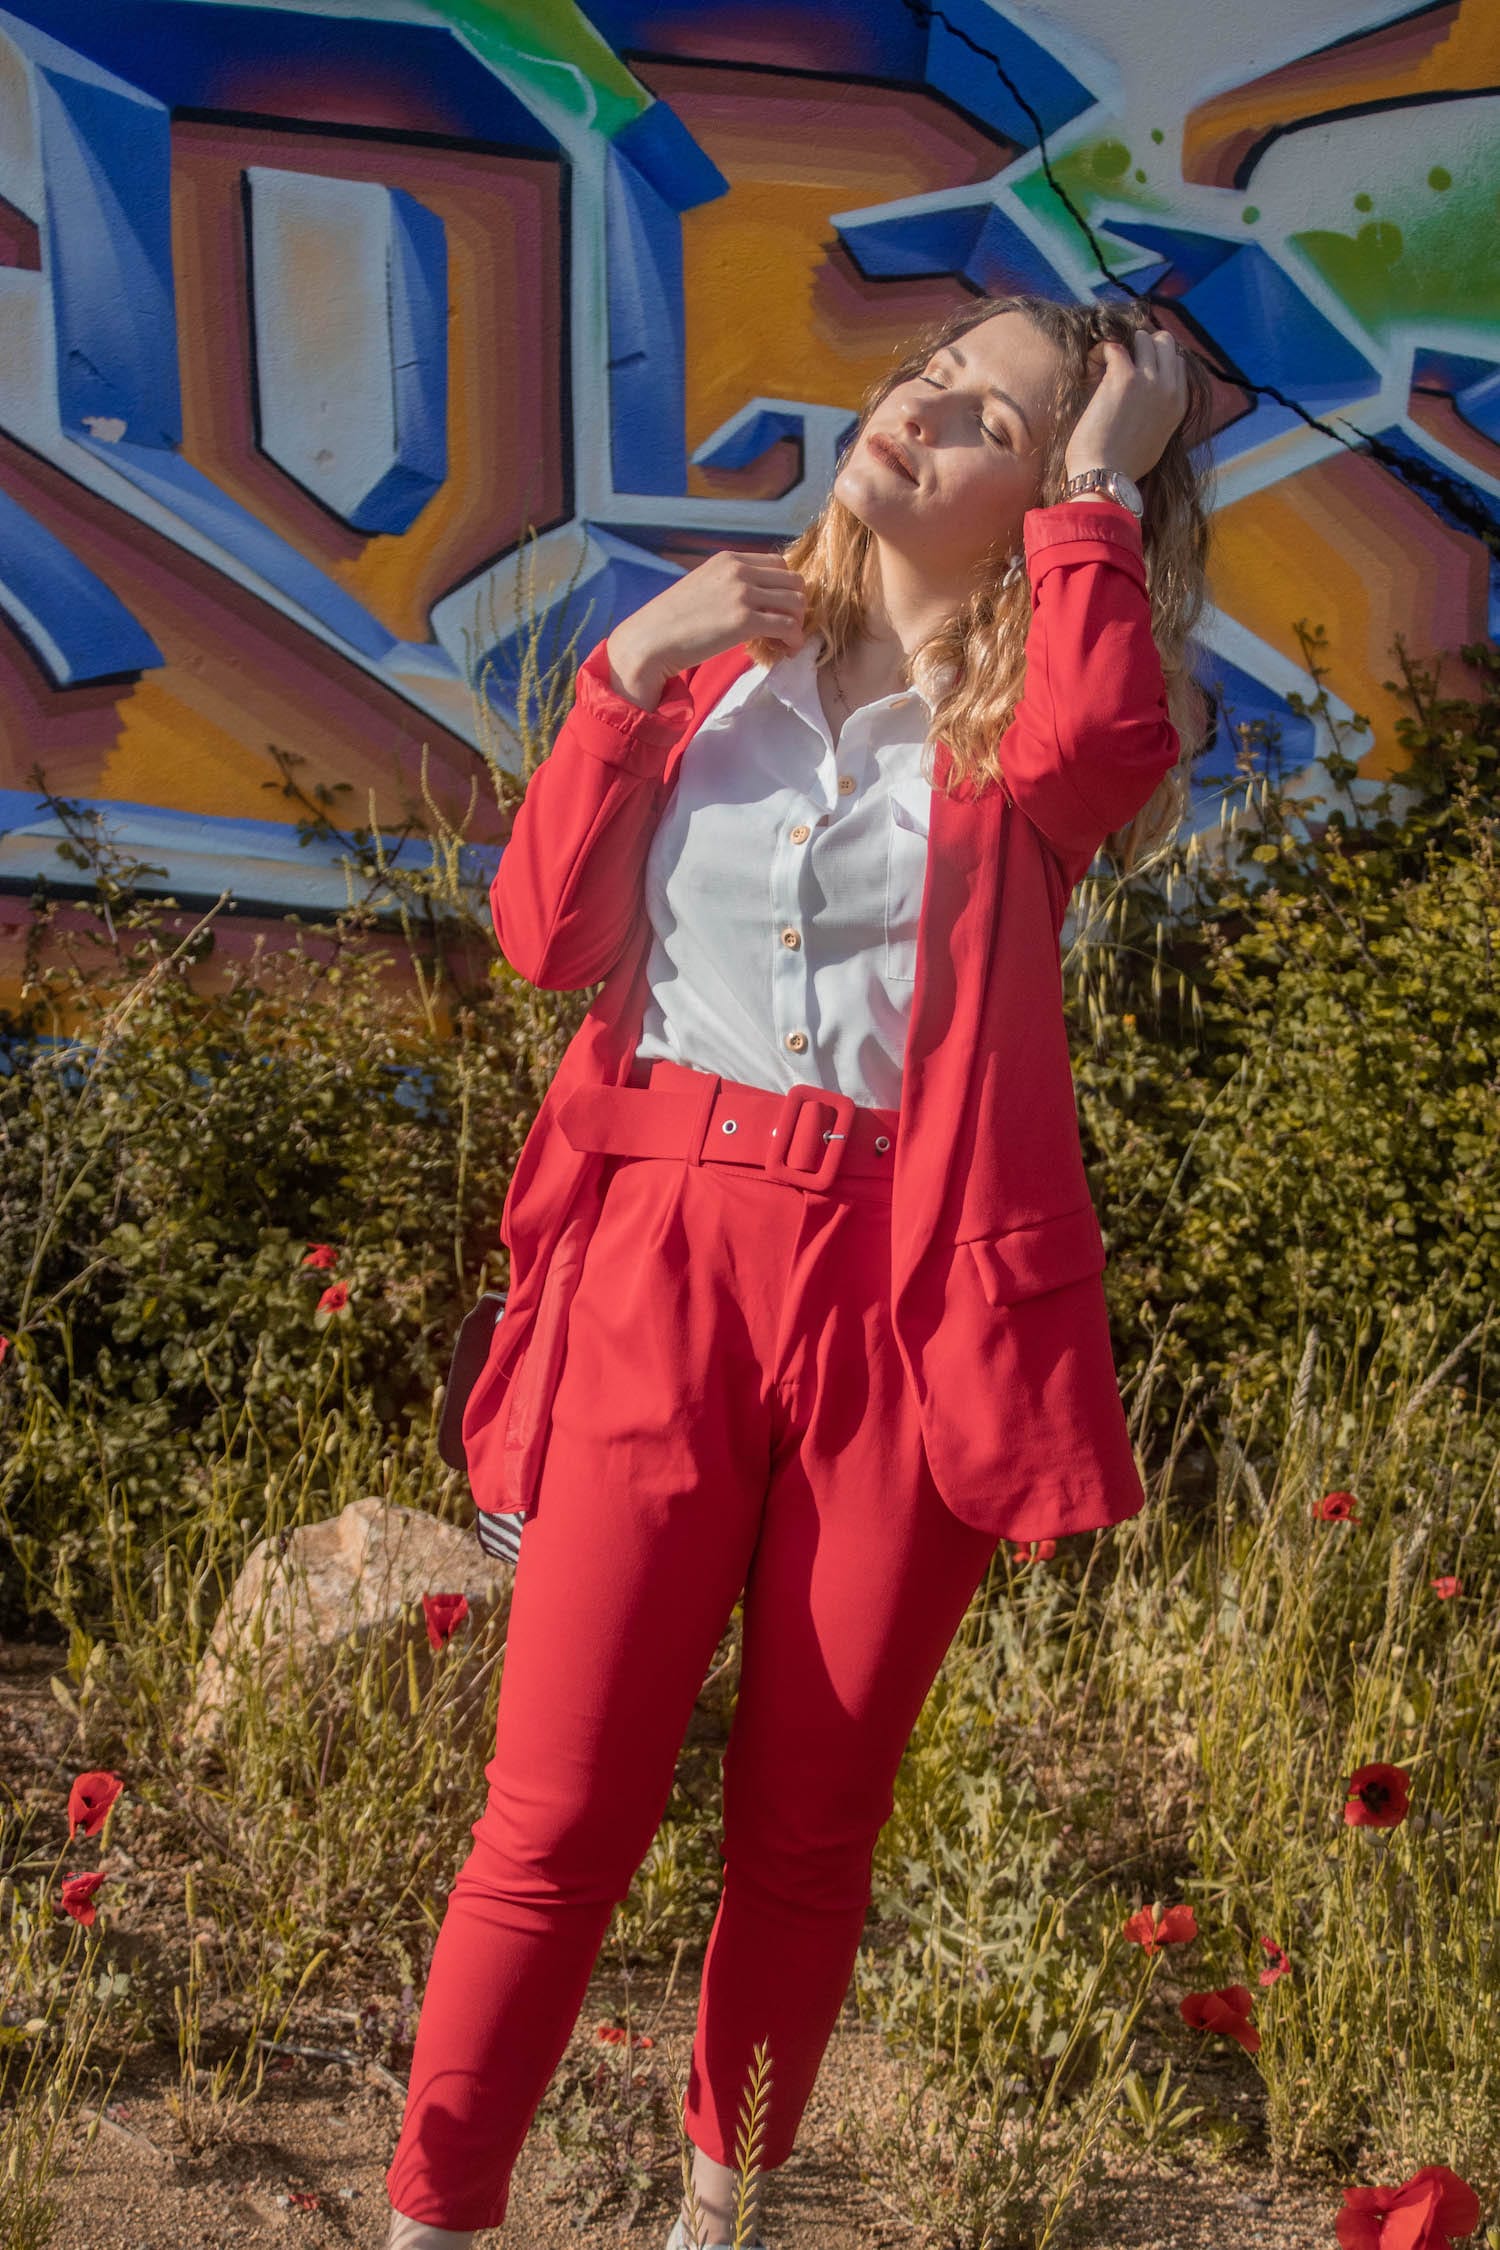 Comment porter le tailleur rouge boohoo ? - happinesscoco.com